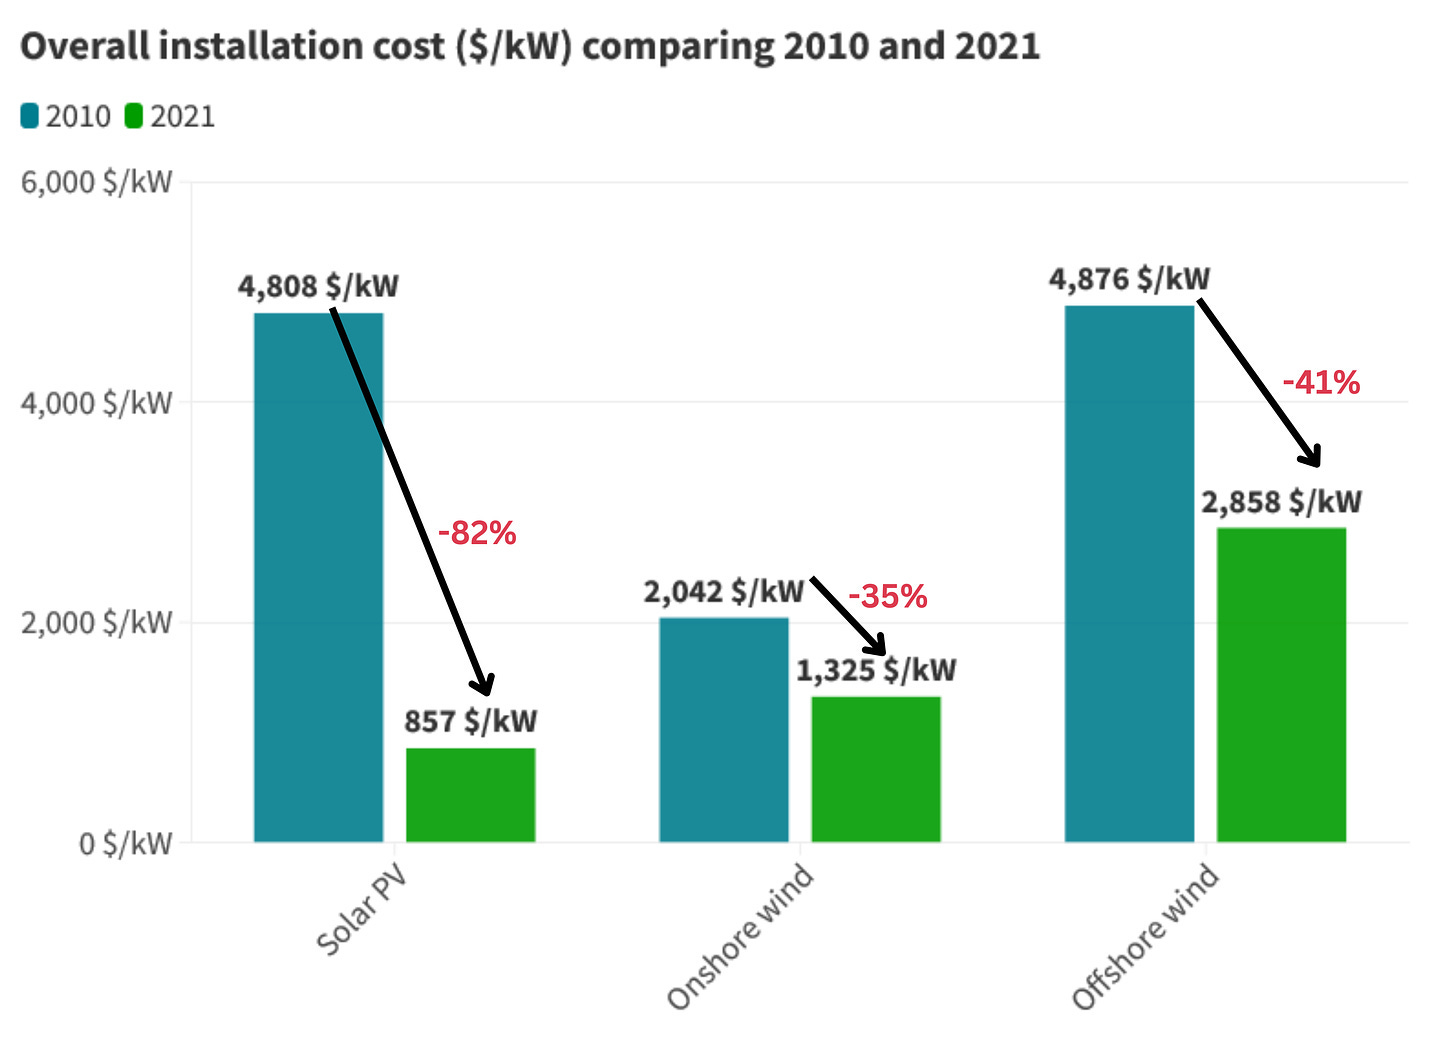 Wind turbine vs solar panel: Figure 3 shows progress in the overall installation cost of wind and solar between 2010 and 2021.